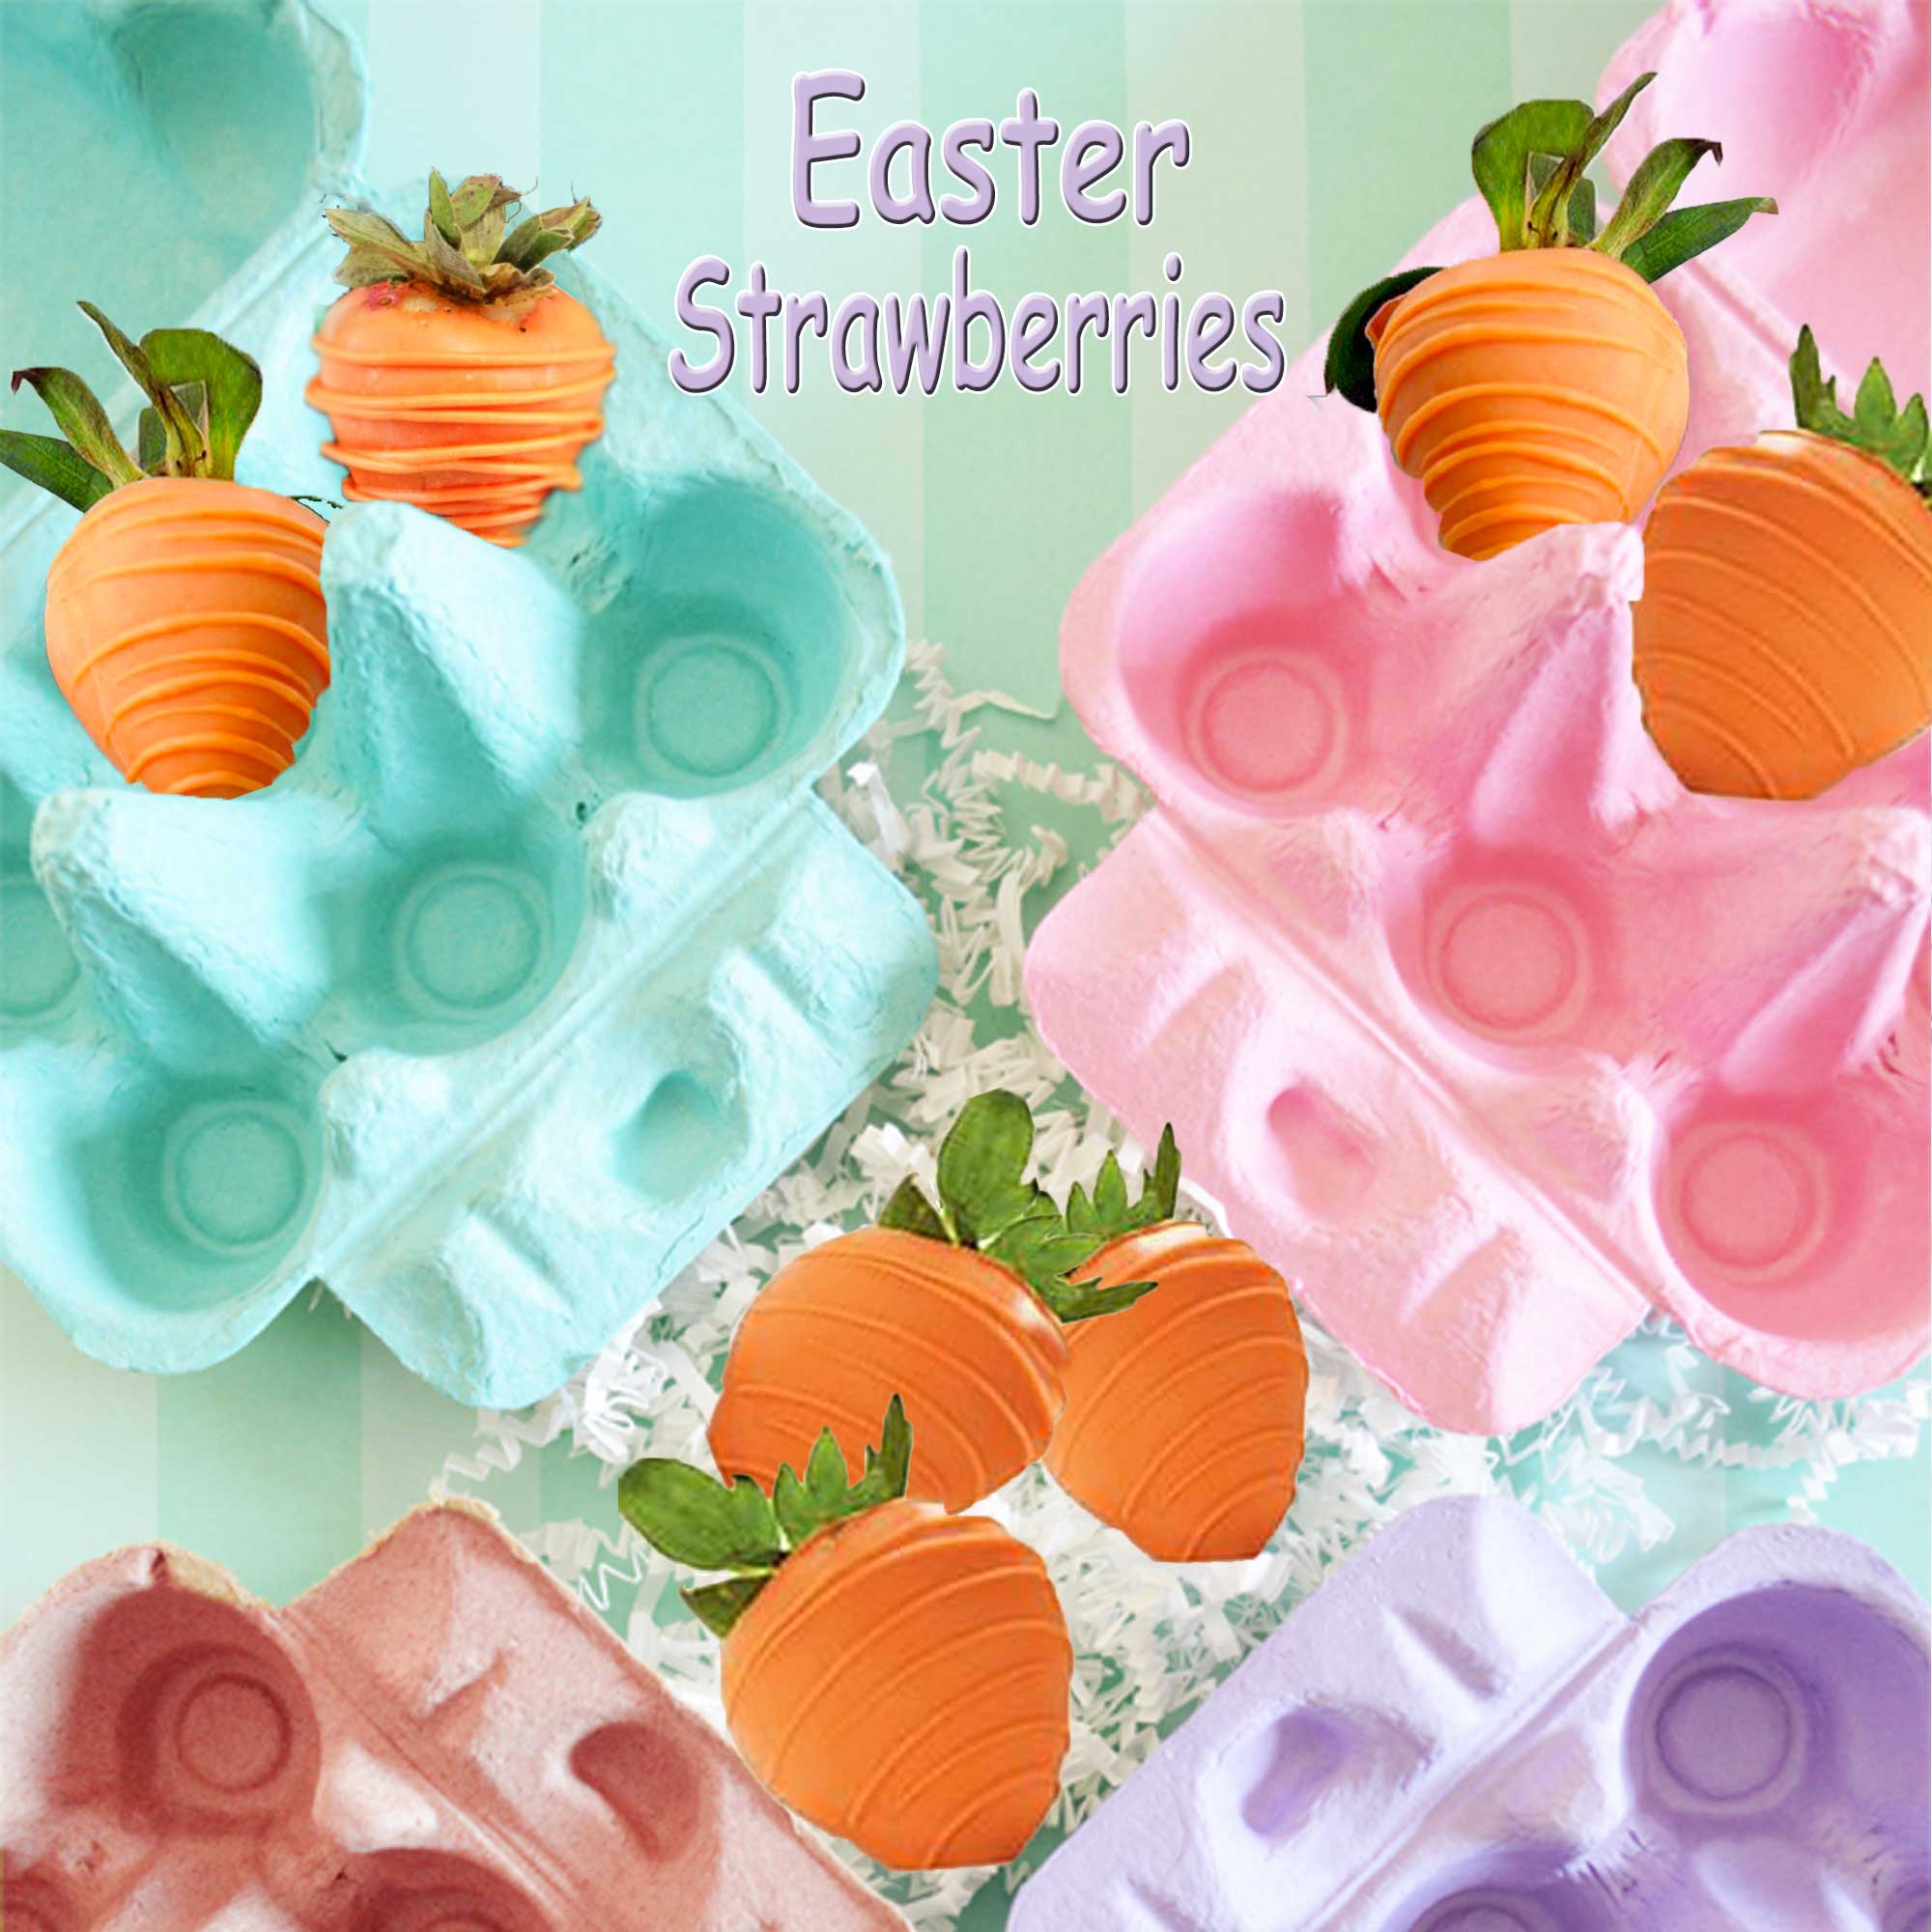 Chocolate Covered Easter Strawberries (Local Only)